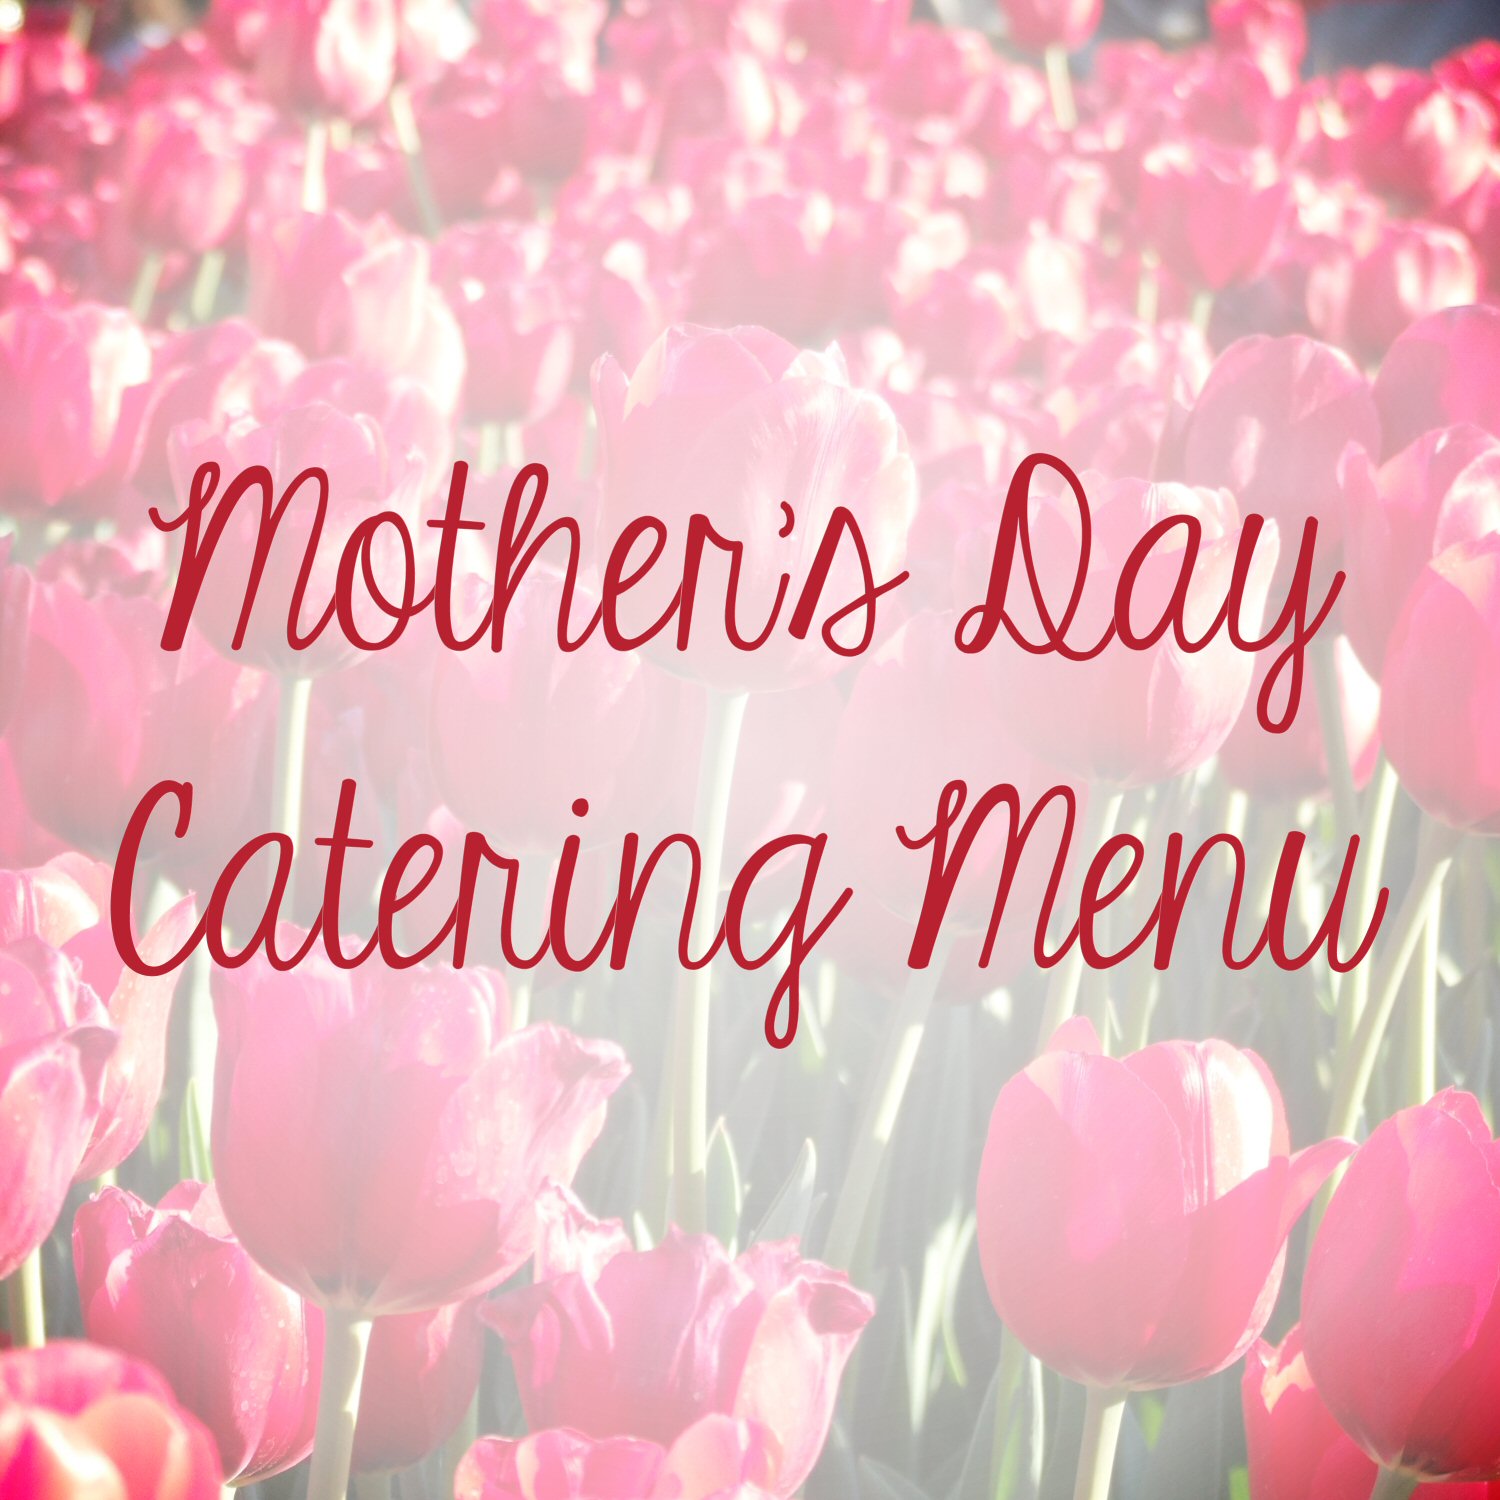 Mother's Day Catering Menu at Lettie's Kitchen in Hockessin, Delaware